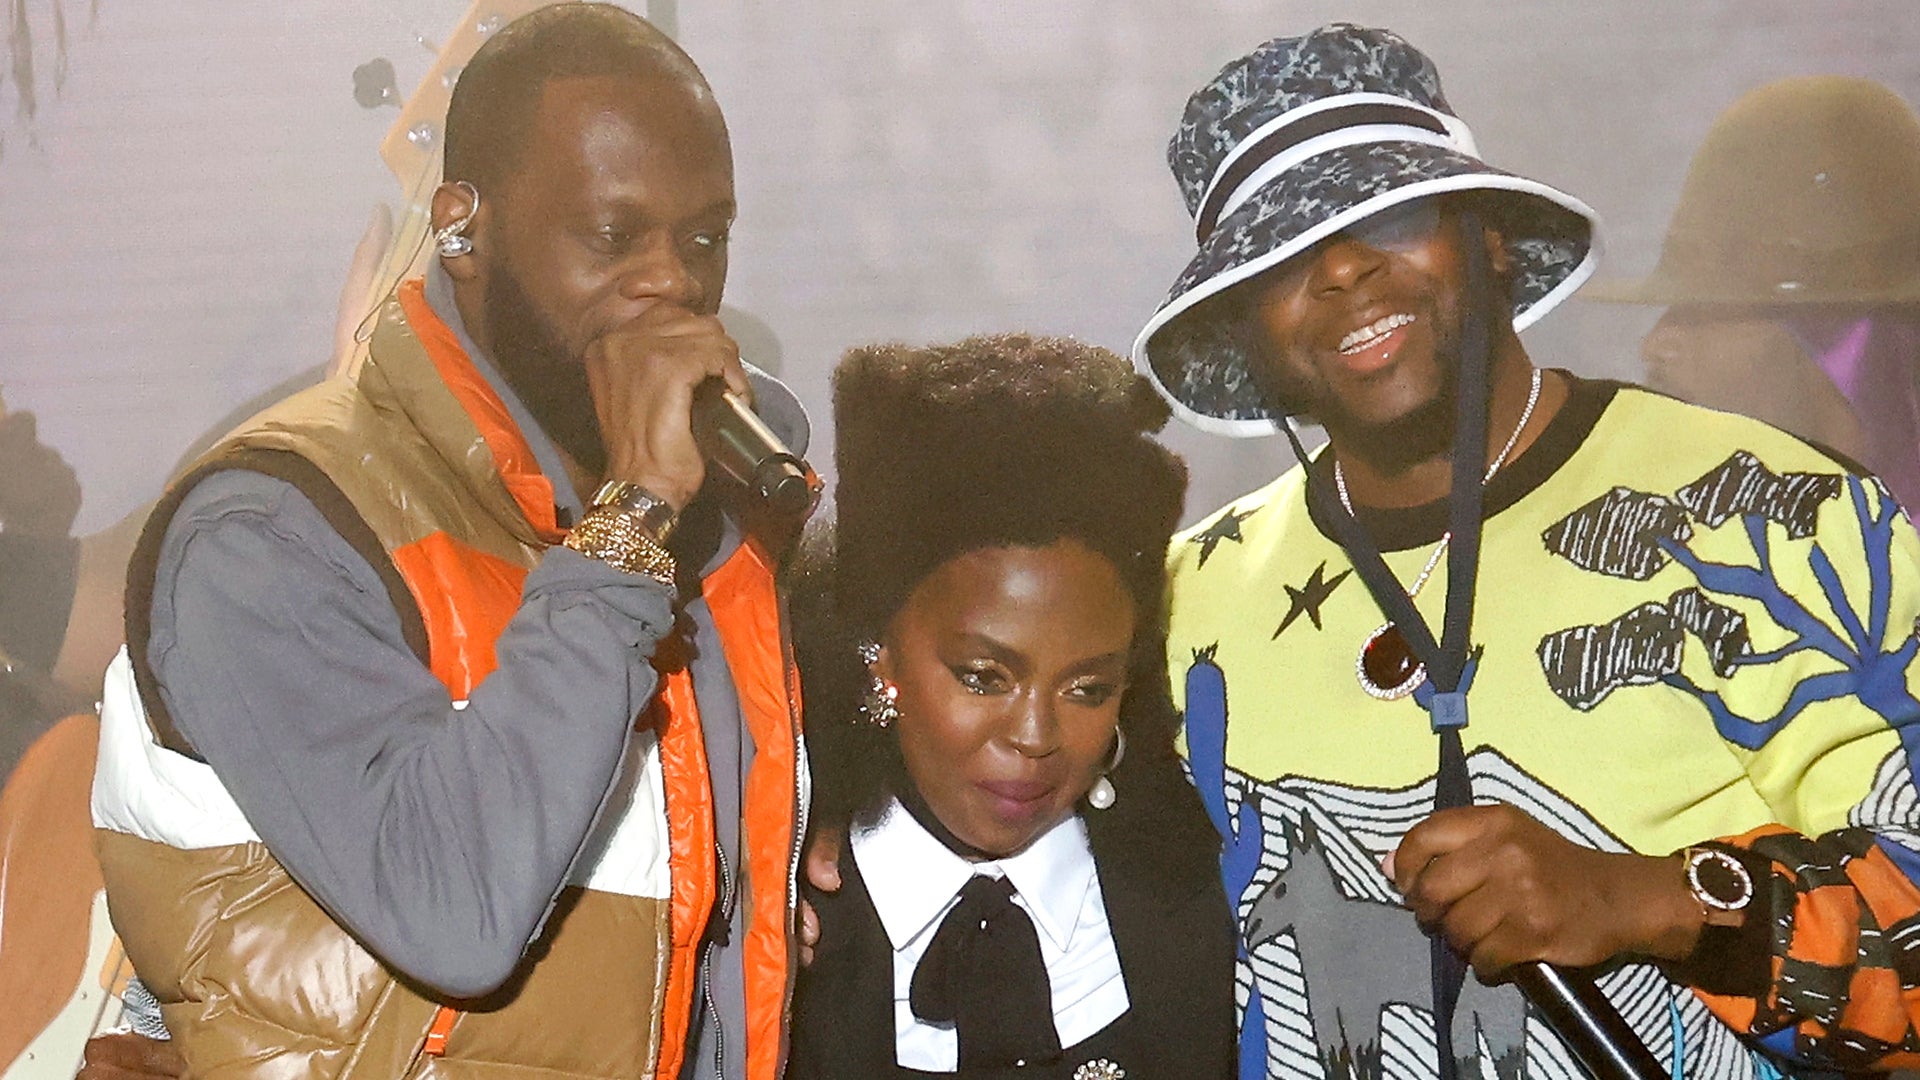 The Fugees Reunite for Surprise Performance Ahead of Pras Michel's Prison Sentencing